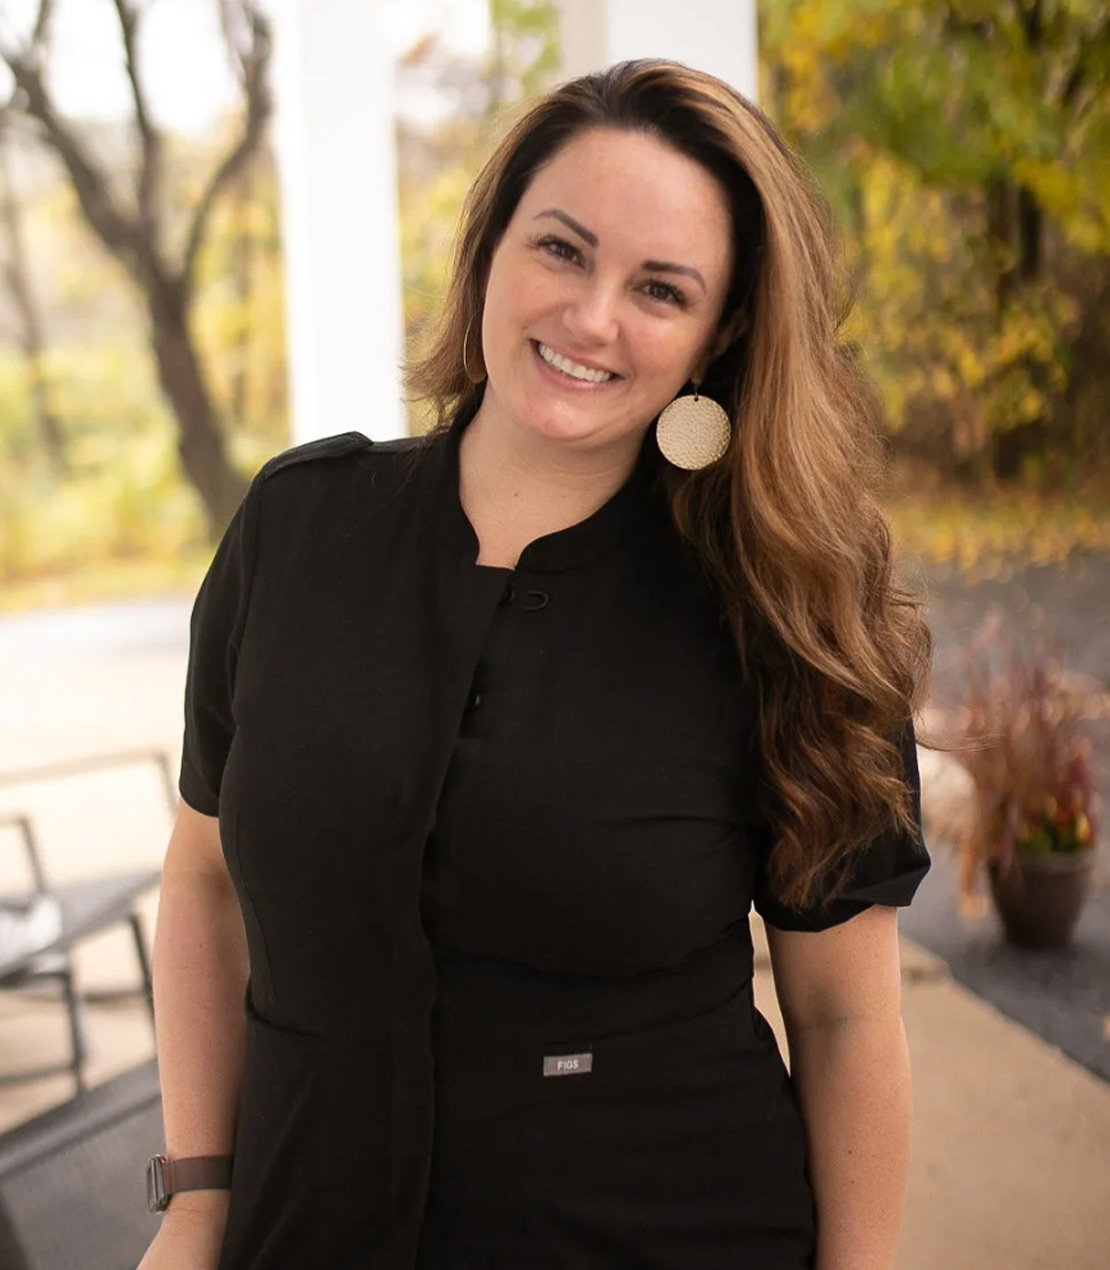 Brandi Robertson, Owner of BASE Wellness and Spa in Chesterton